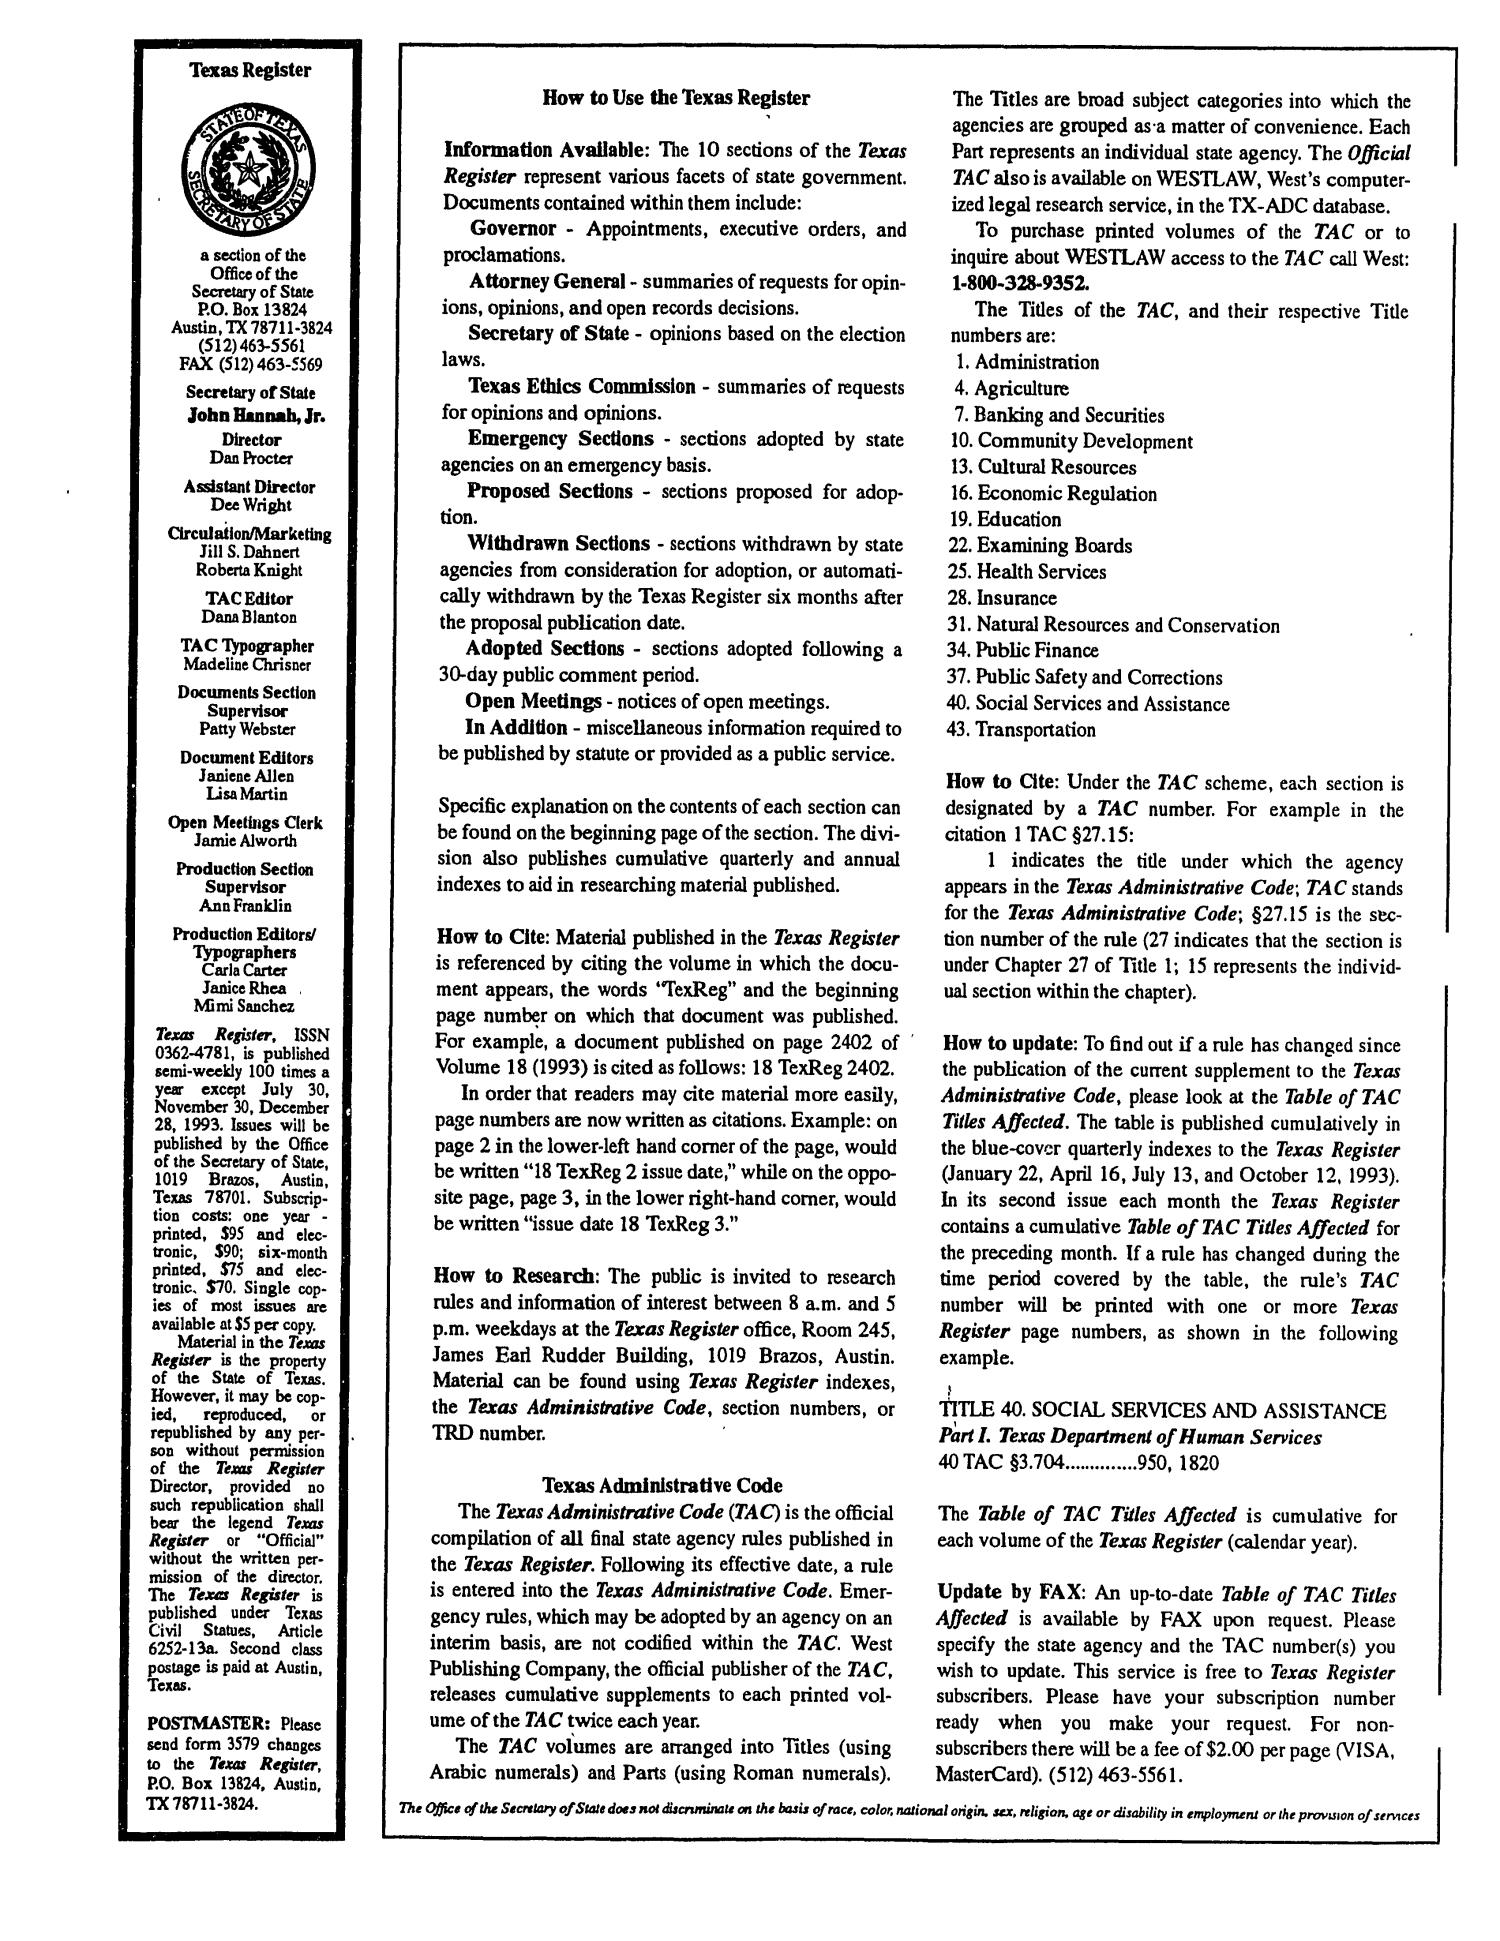 Texas Register, Volume 18, Number 2, Pages 90-185, January 5, 1993
                                                
                                                    None
                                                